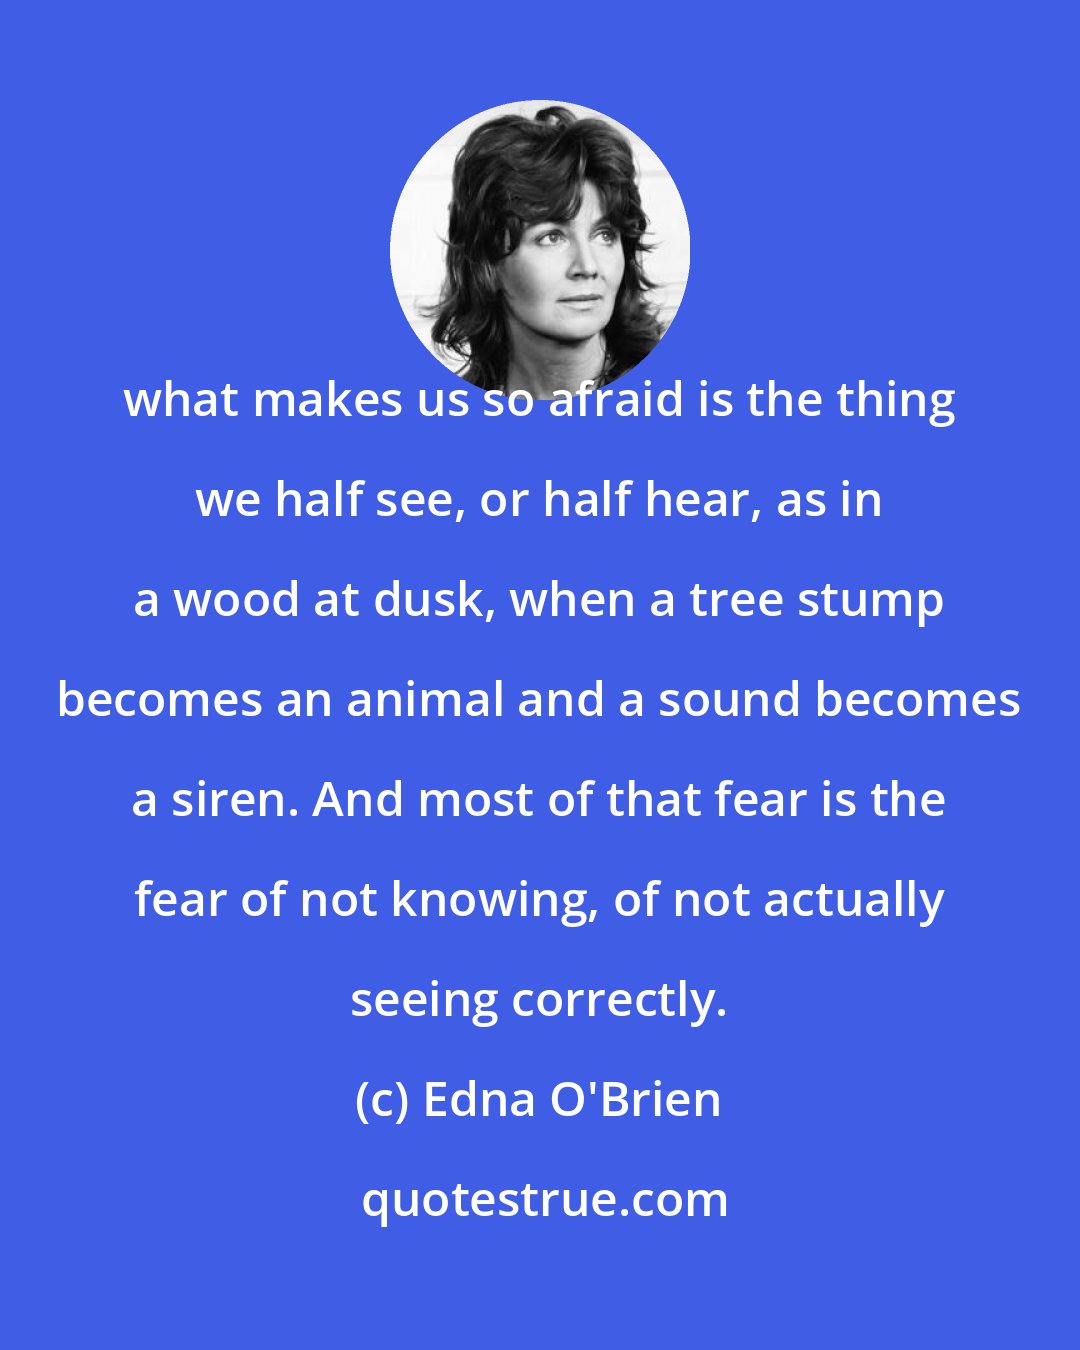 Edna O'Brien: what makes us so afraid is the thing we half see, or half hear, as in a wood at dusk, when a tree stump becomes an animal and a sound becomes a siren. And most of that fear is the fear of not knowing, of not actually seeing correctly.